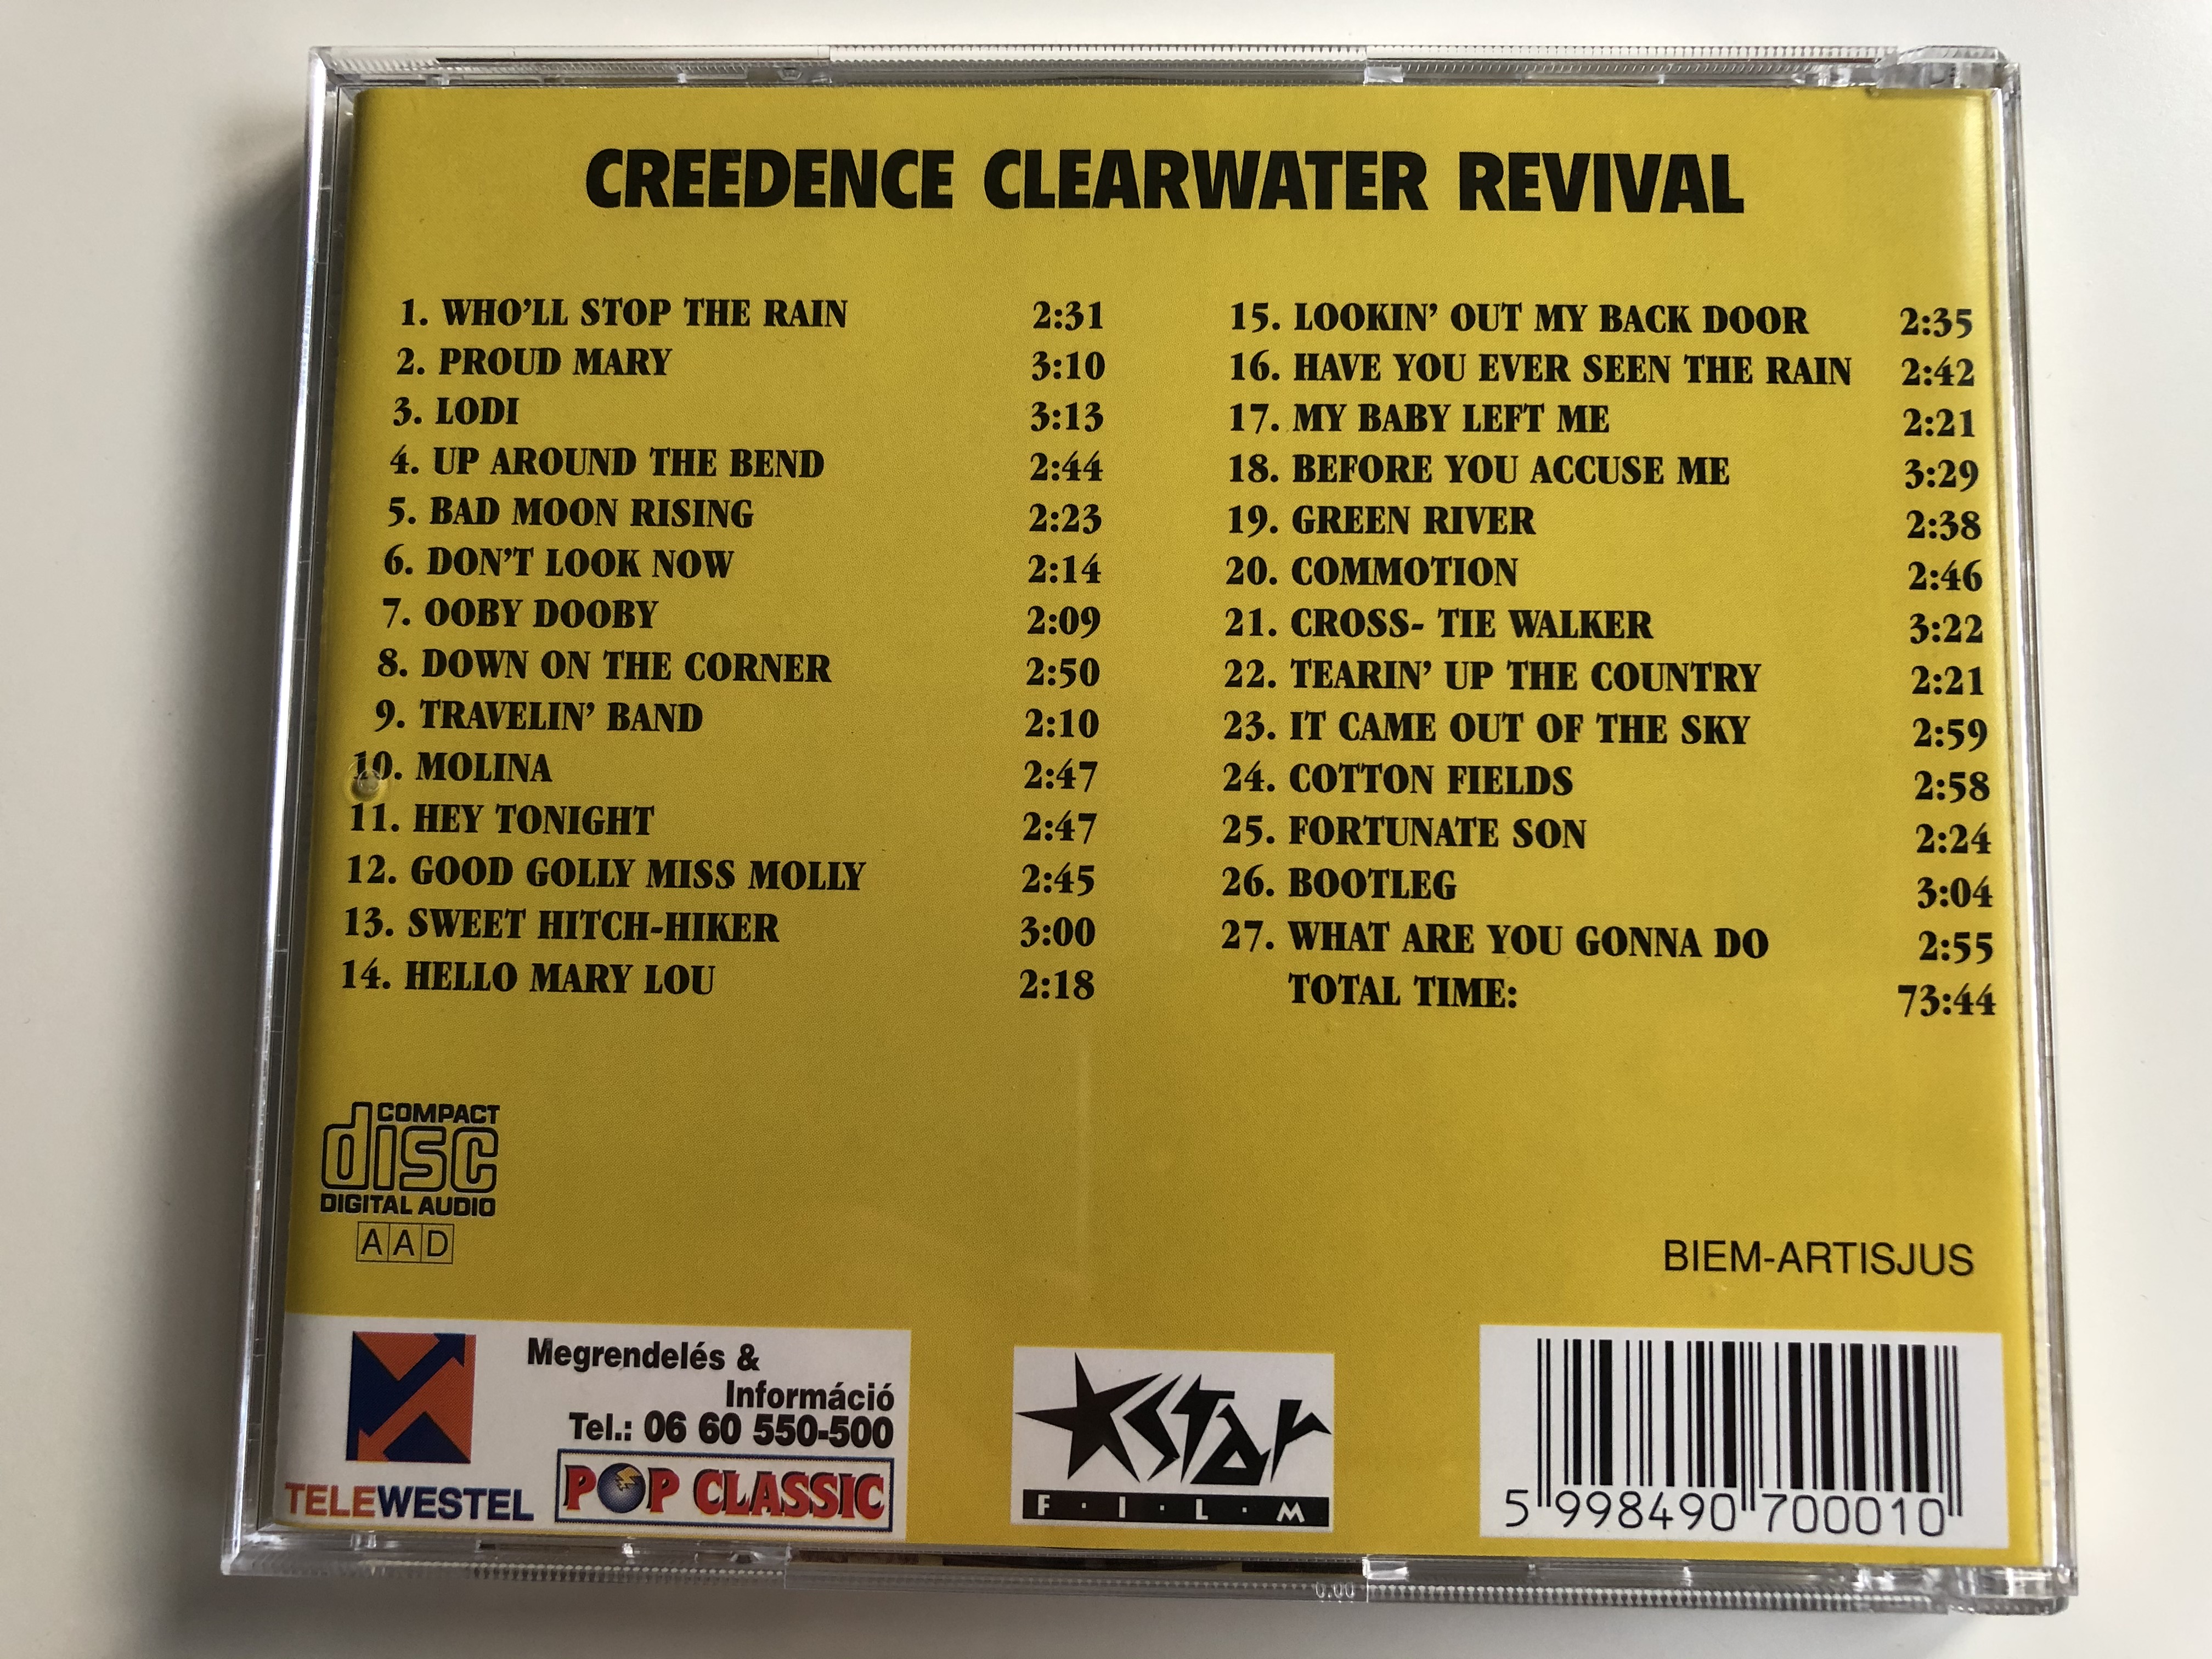 creedence-clearwater-revival-best-of-total-time-73.44-pop-classic-euroton-audio-cd-eucd-0001-4-.jpg